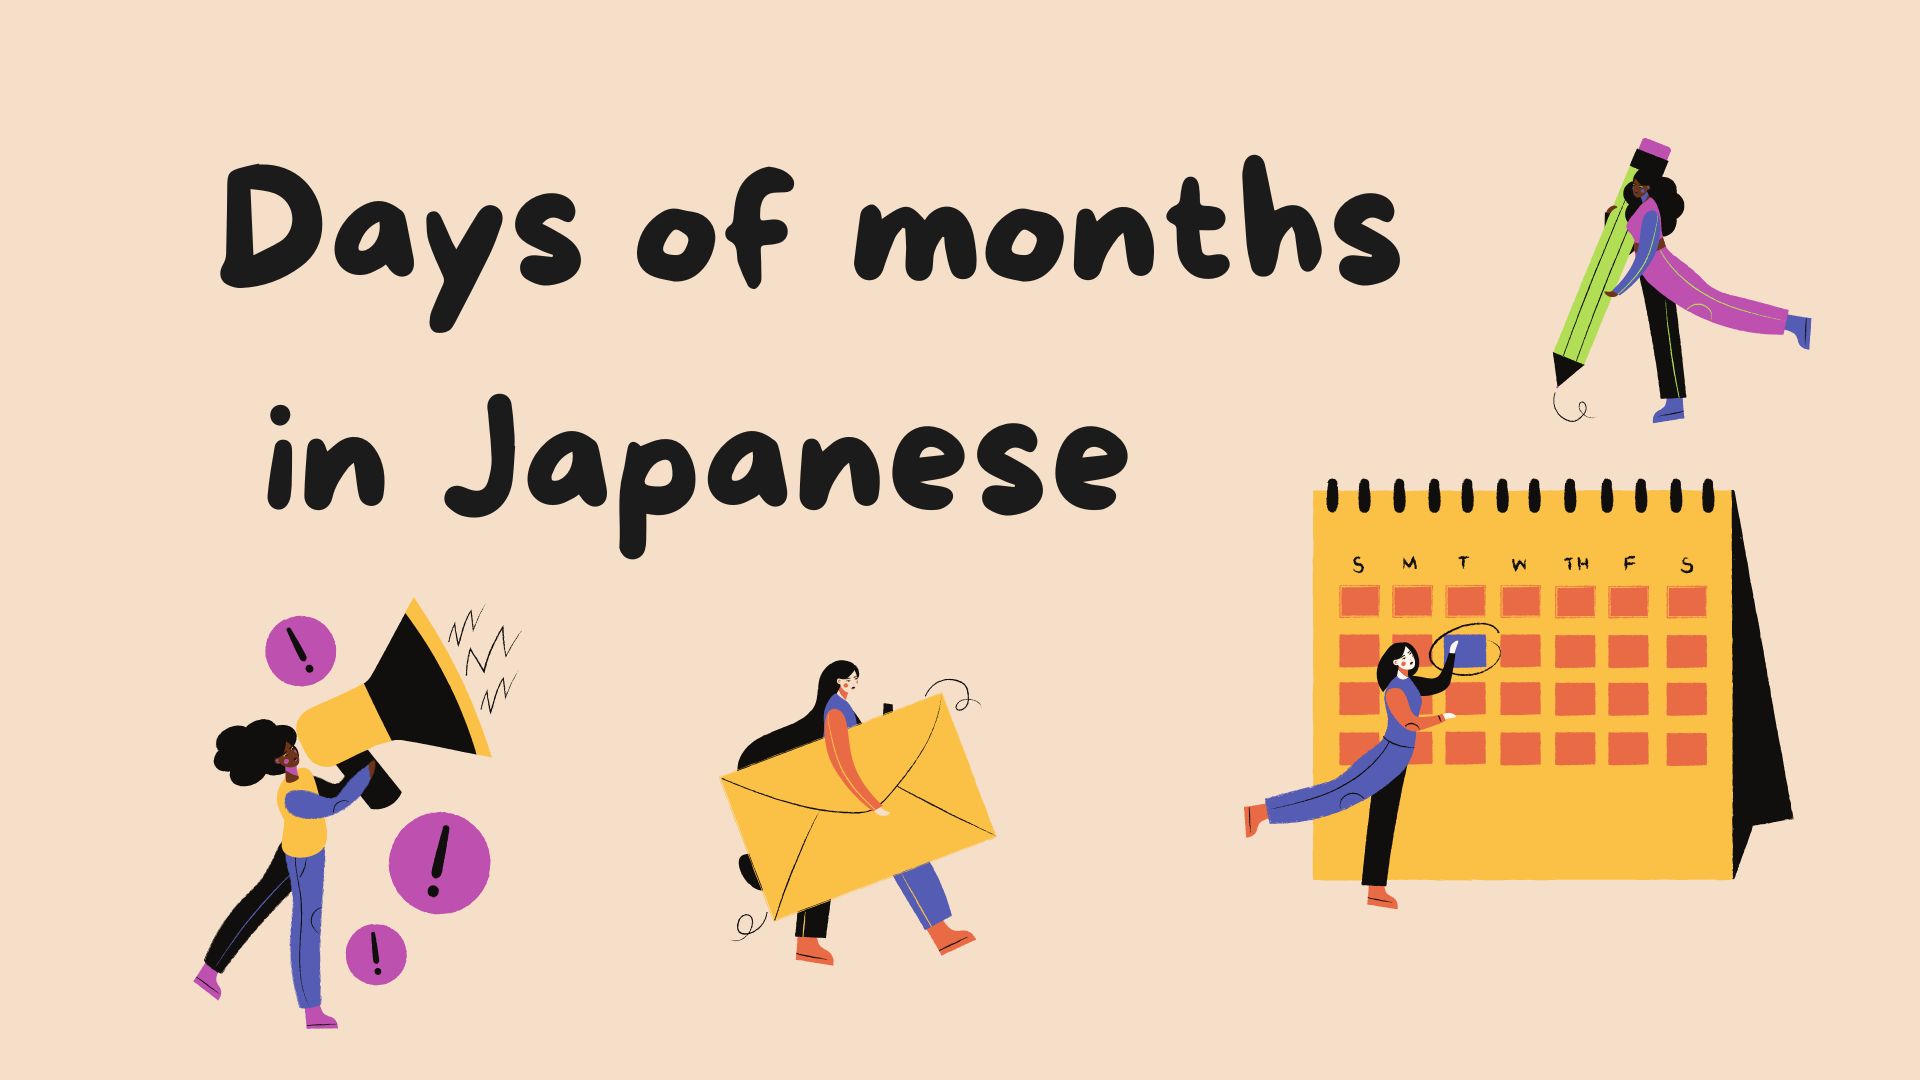 days-of-months-in-japanese-figure-out-japanese-calendar-linkup-nippon